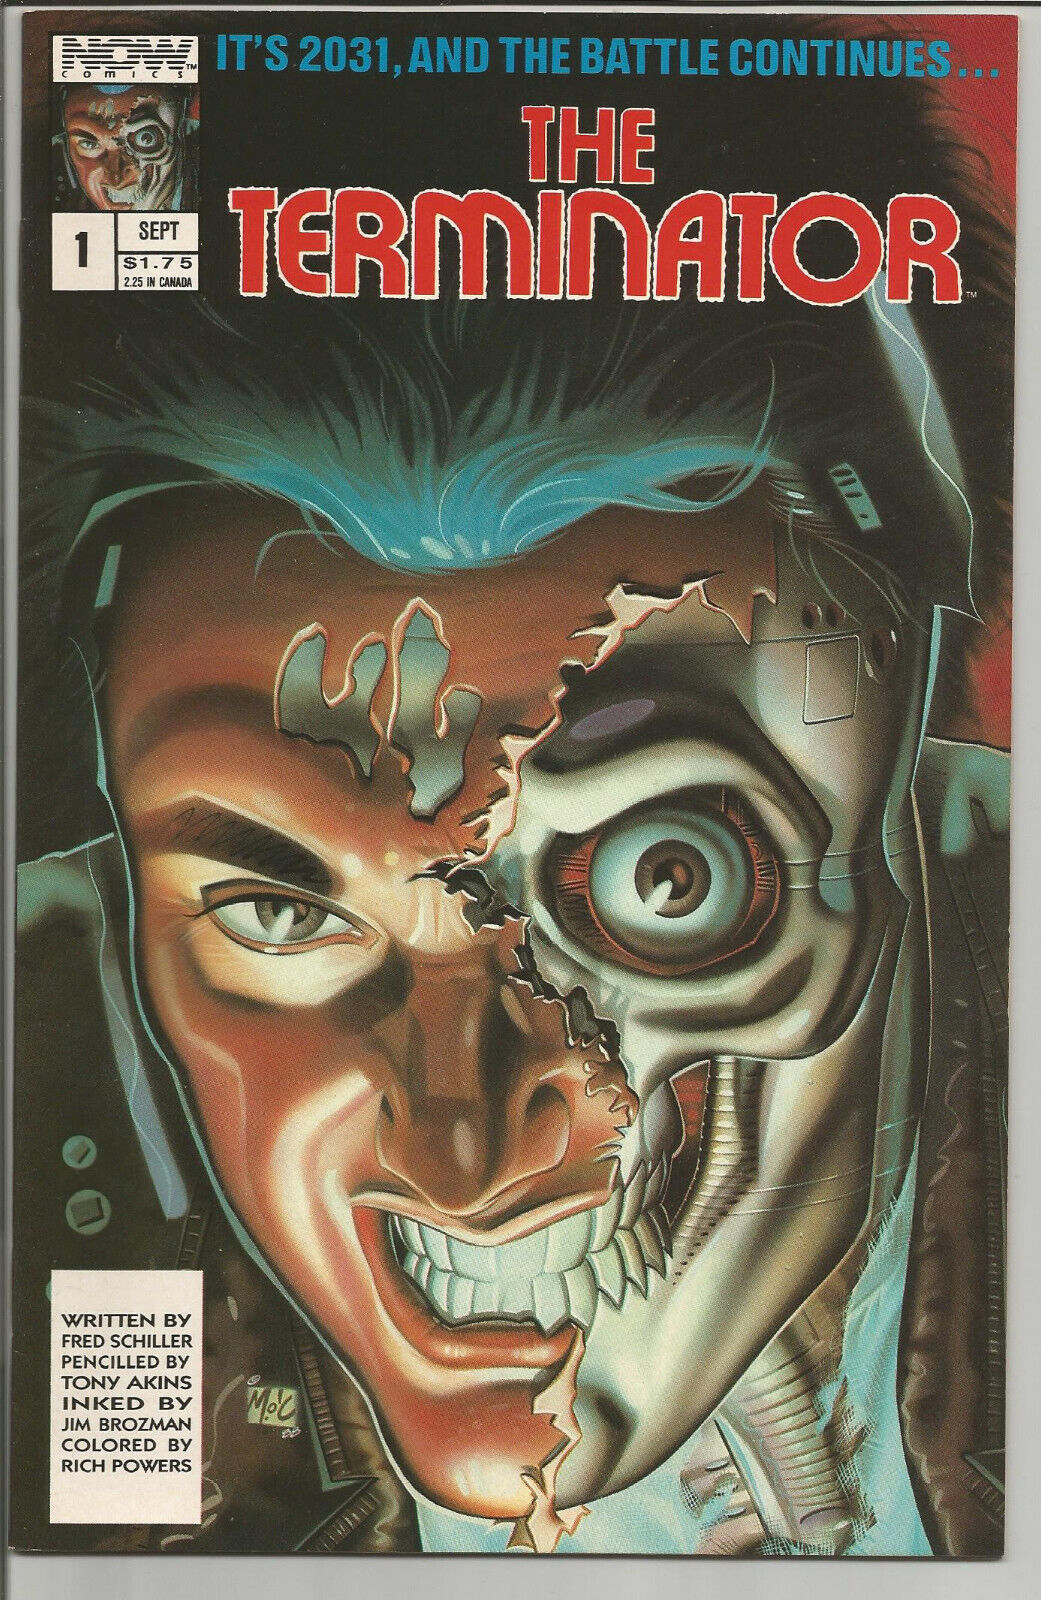 THE TERMINATOR #1 (Vol. 1, 1988, Now/Direct) NM New/Old Stock 